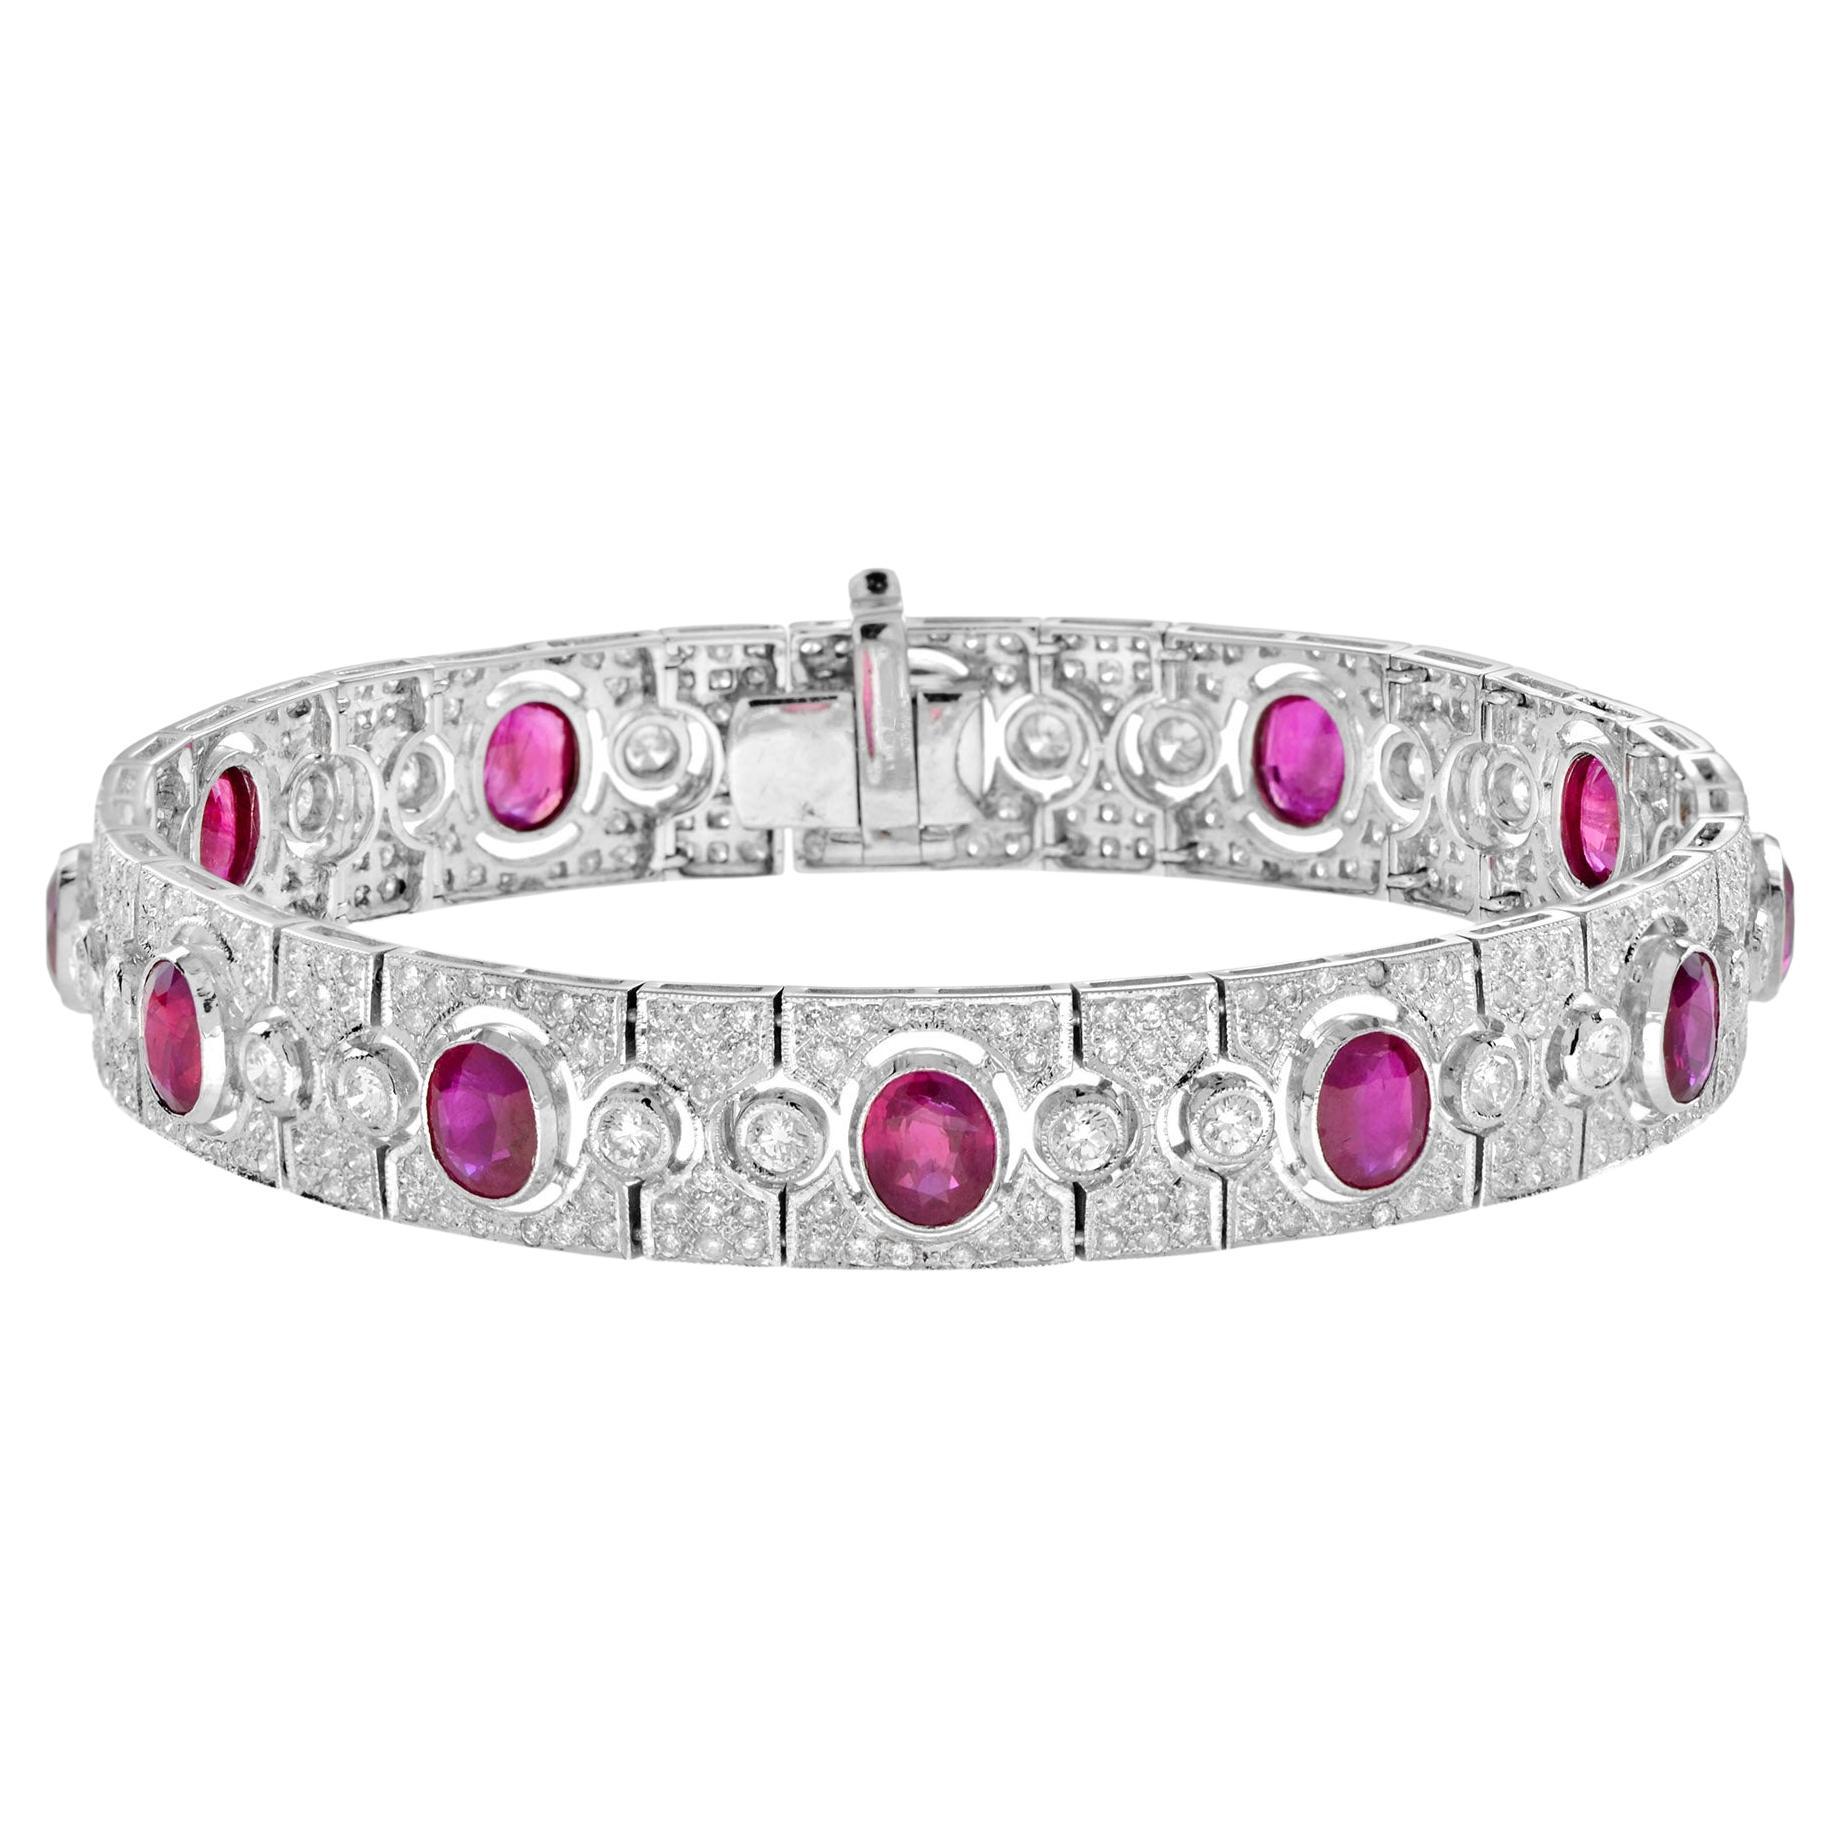 Art Deco Style 8.87 Ct. Oval Ruby and Diamond Bracelet in 18K White Gold For Sale